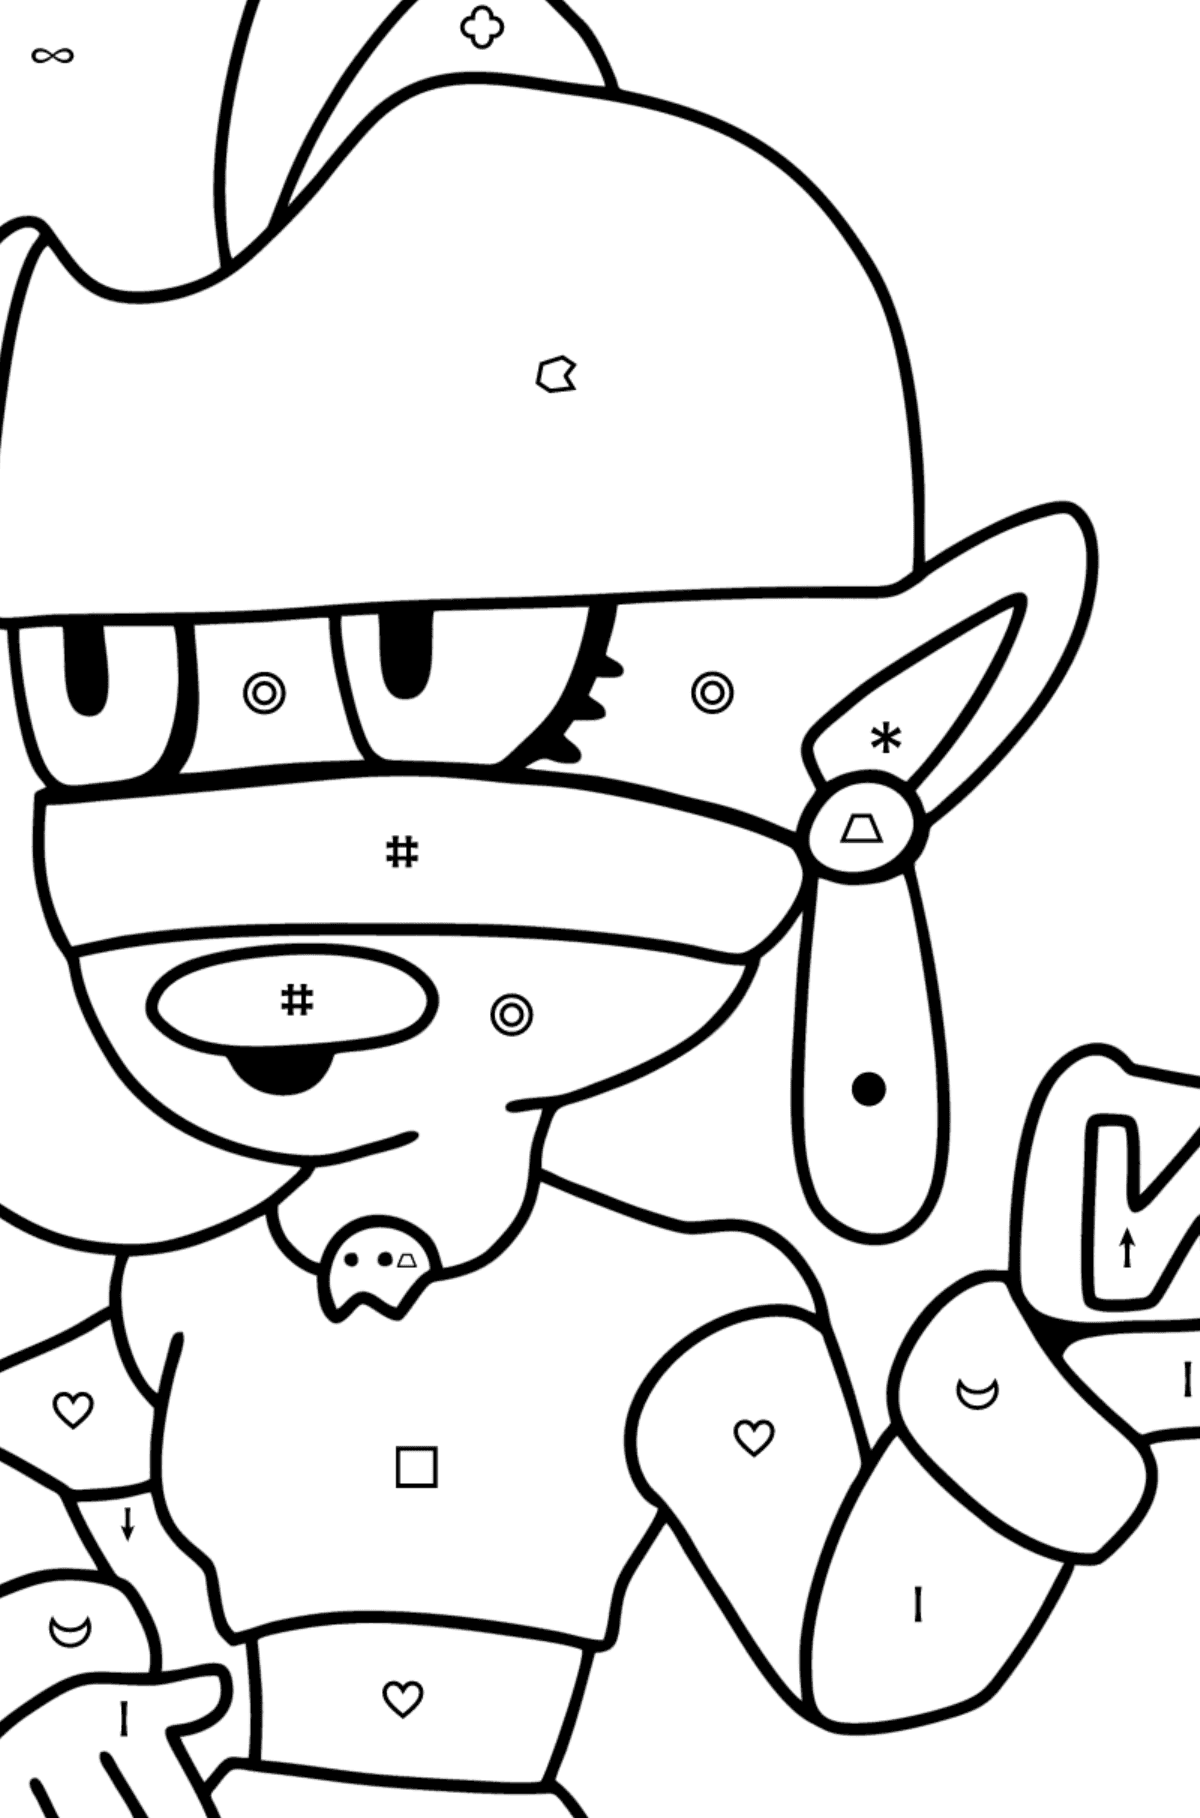 Brawl Stars Emz coloring page - Coloring by Symbols and Geometric Shapes for Kids